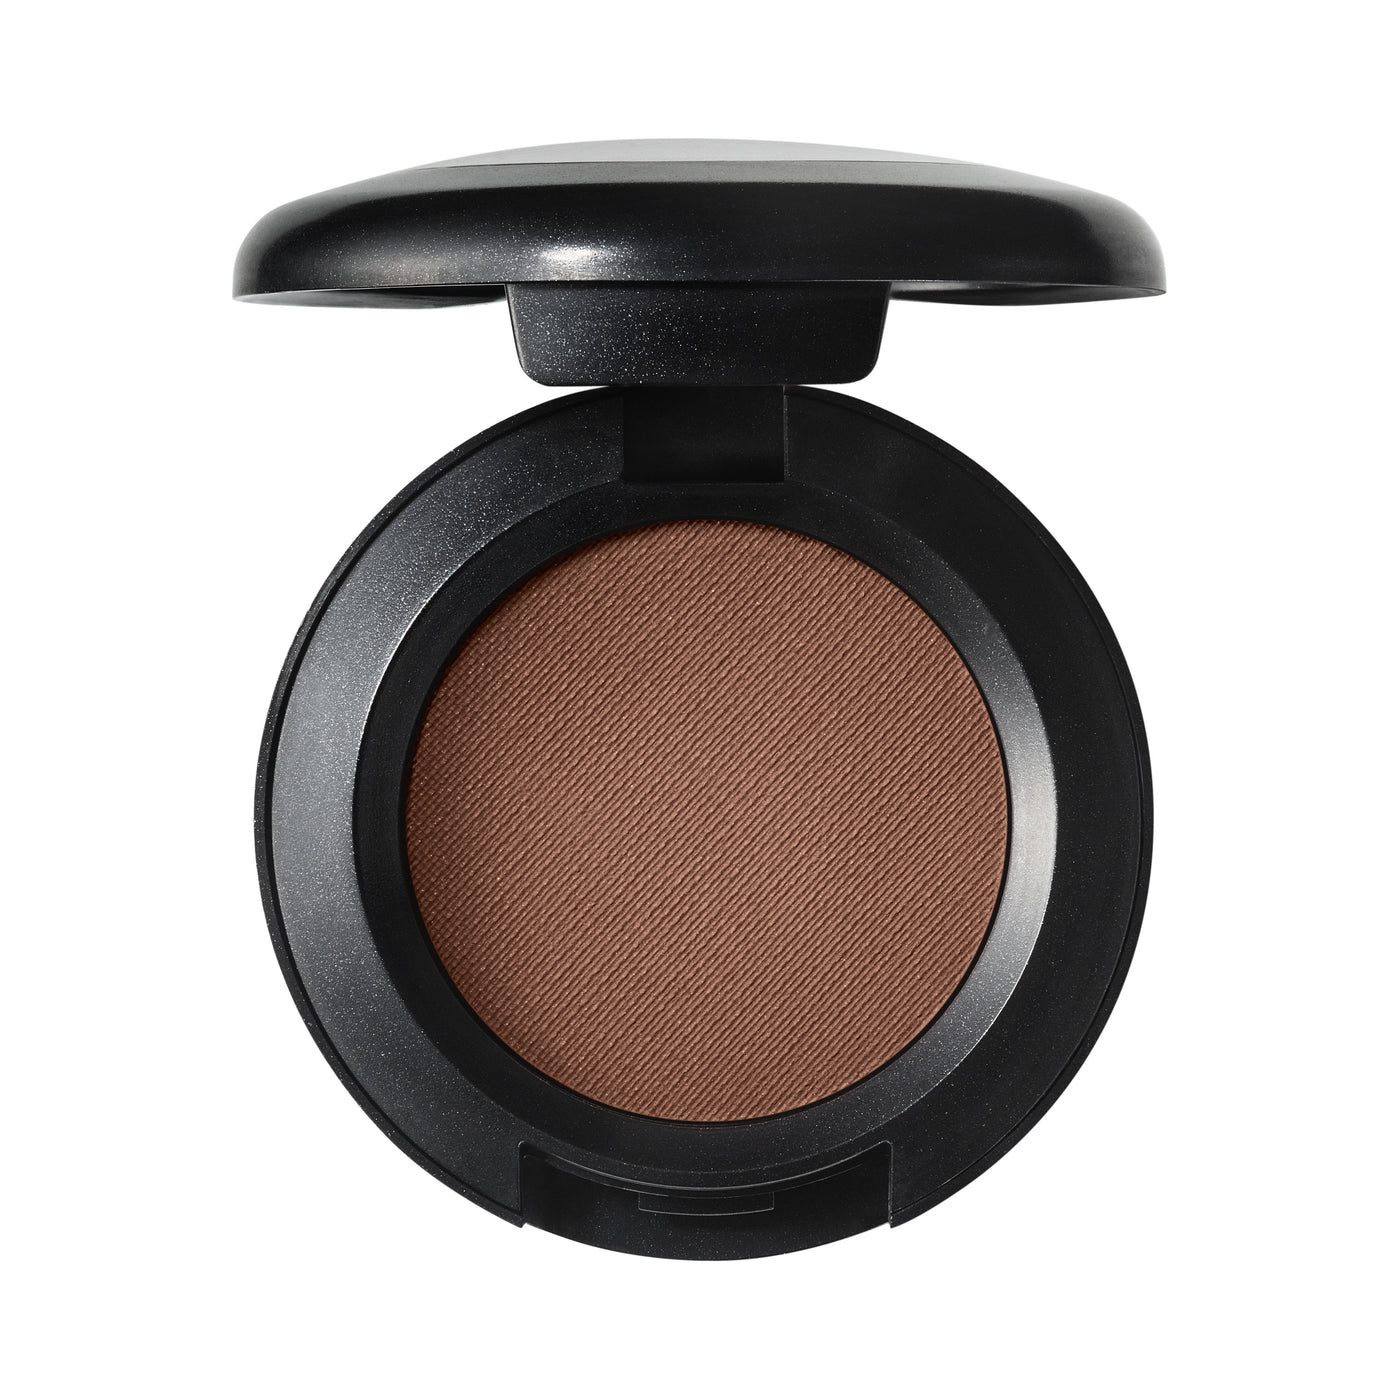 Shop The Latest Collection Of Mâ·Aâ·C Small Eye Shadow In Lebanon